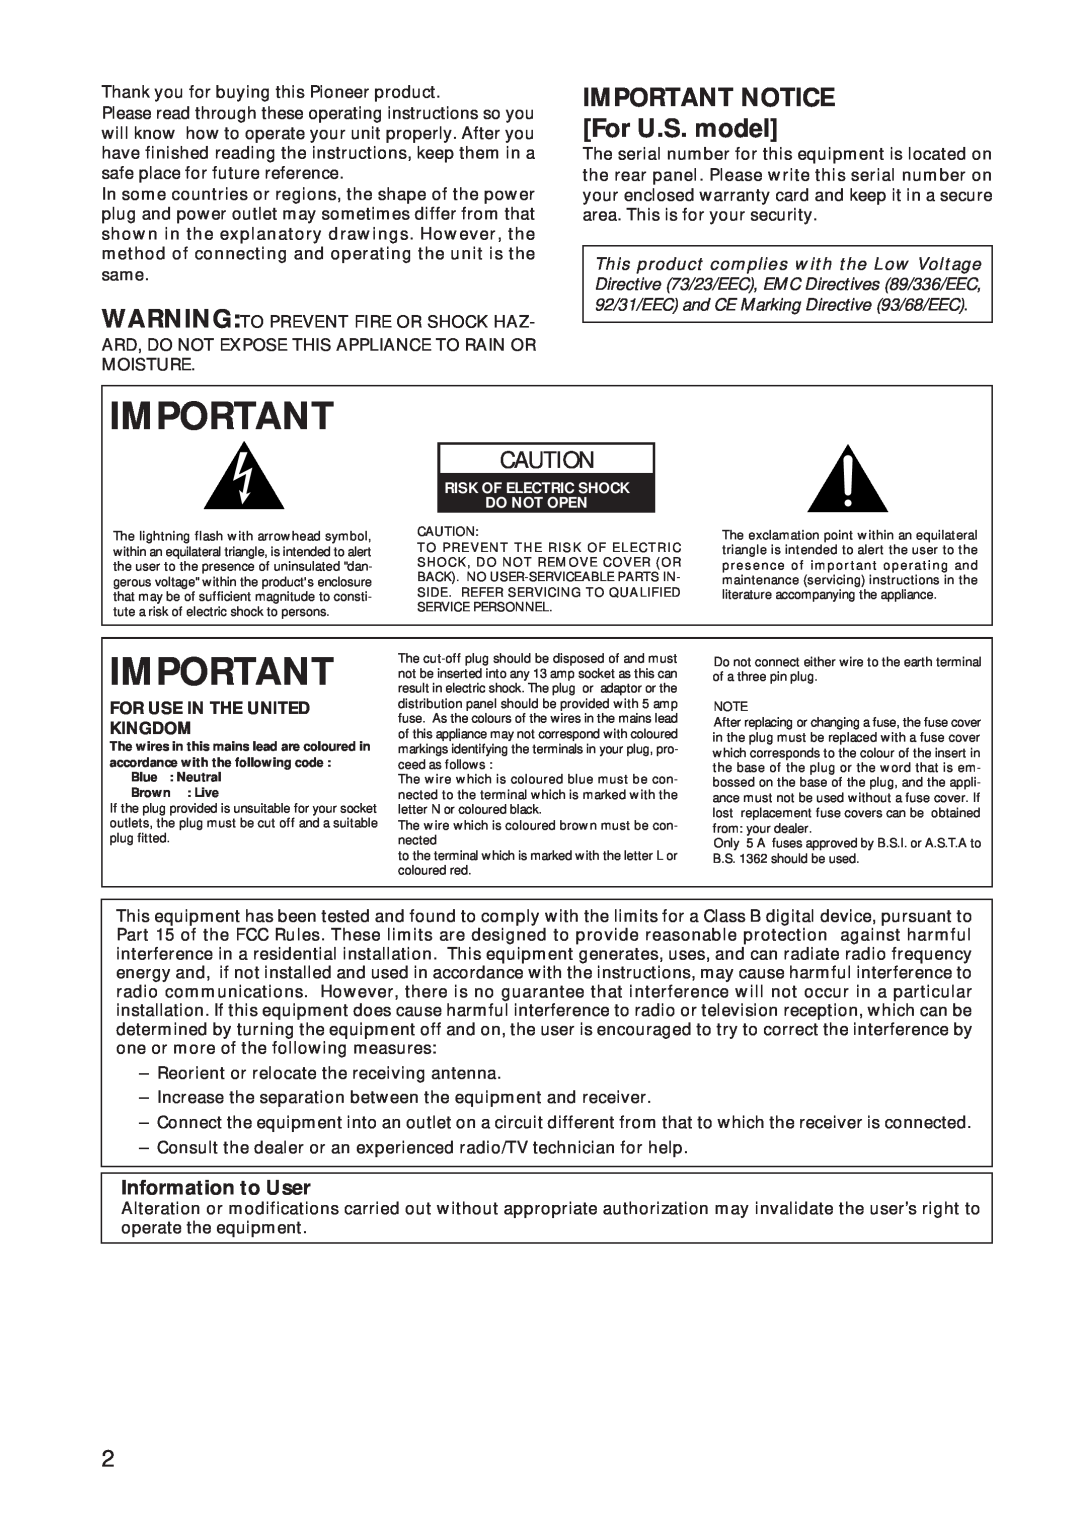 Pioneer CT-W208R operating instructions IMPORTANT NOTICE For U.S. model, Information to User, For Use In The United Kingdom 